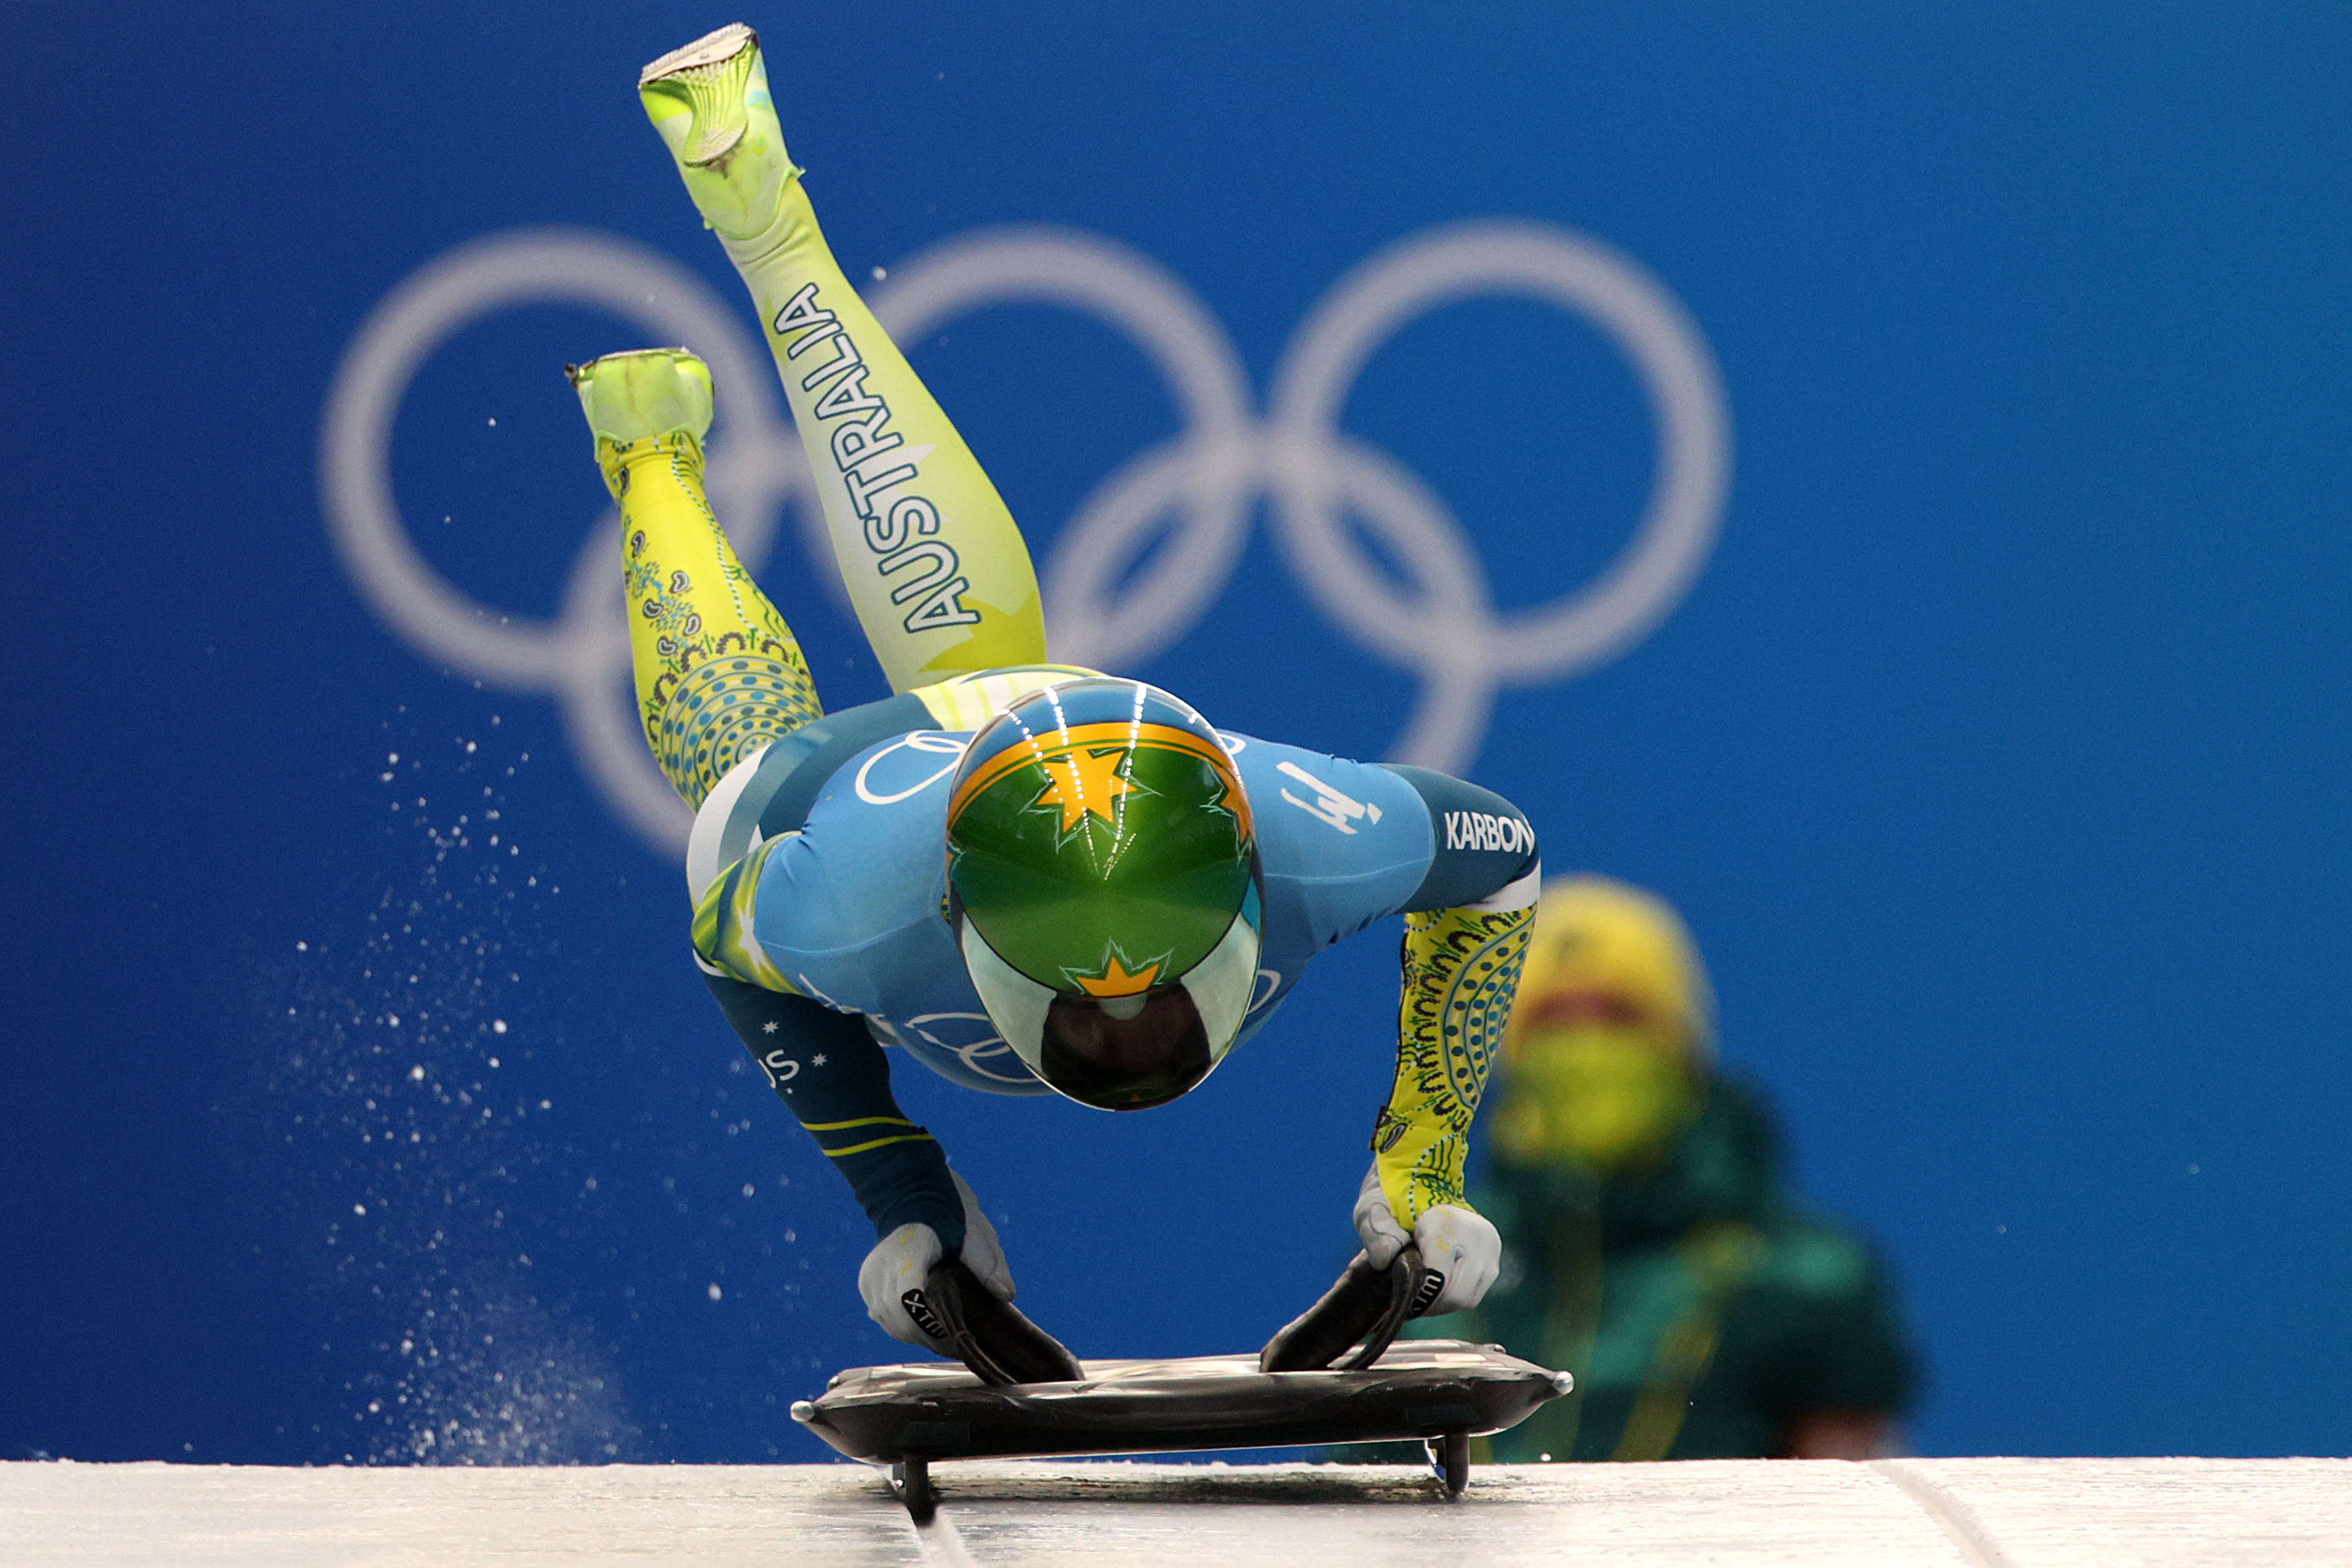 Image shows a skeleton racer jumping into their sled. The racer is wearing a green and gold skinsuit. 